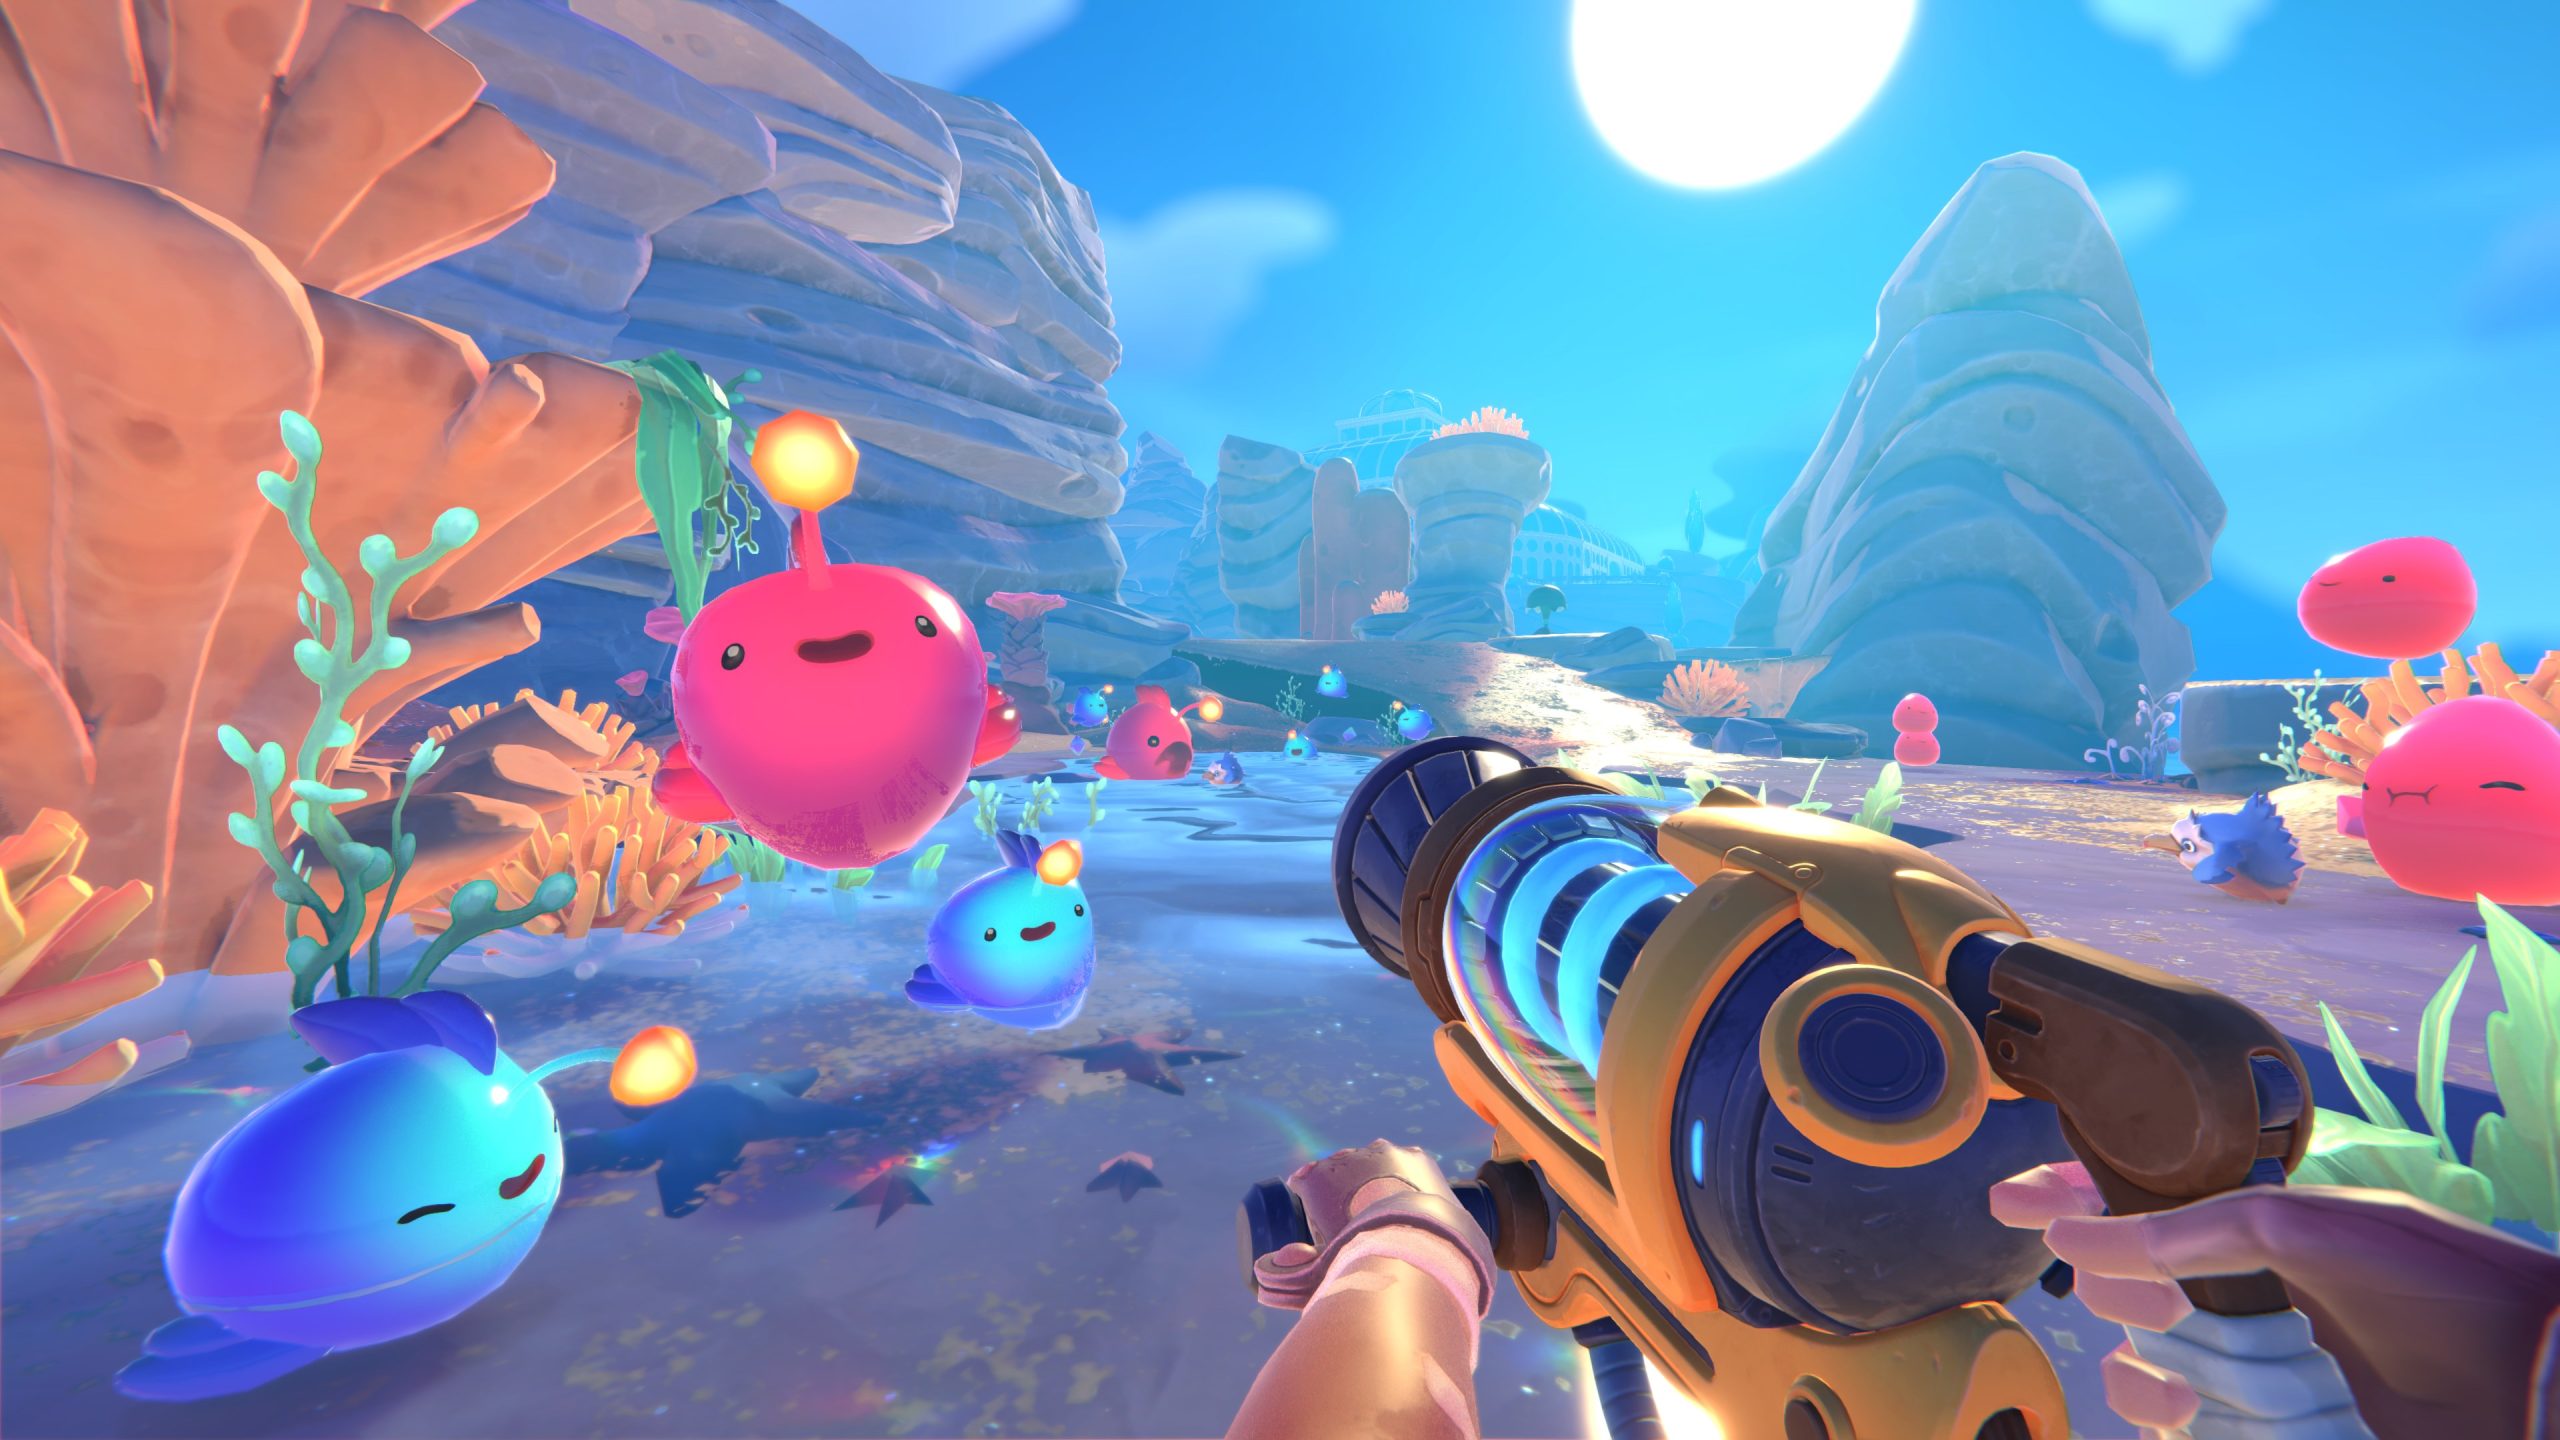 Will Slime Rancher 2 Be on Xbox One? - Answered - Prima Games